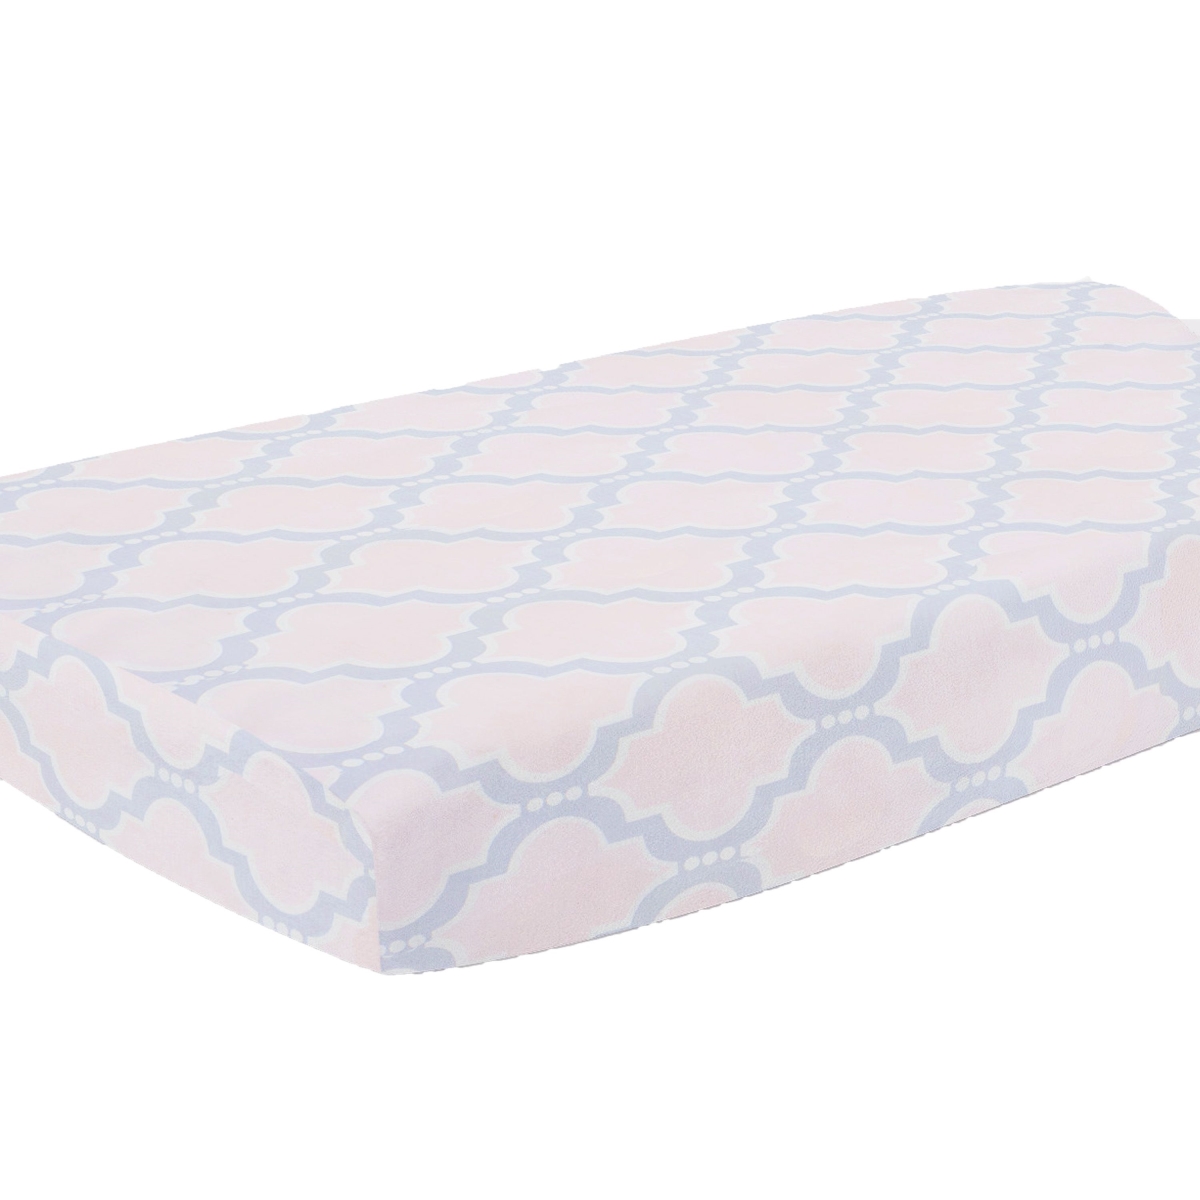 Cpc-pkmedallion 32 X 16 X 5 In. Pink Medallion Changing Pad Cover Pink & Grey